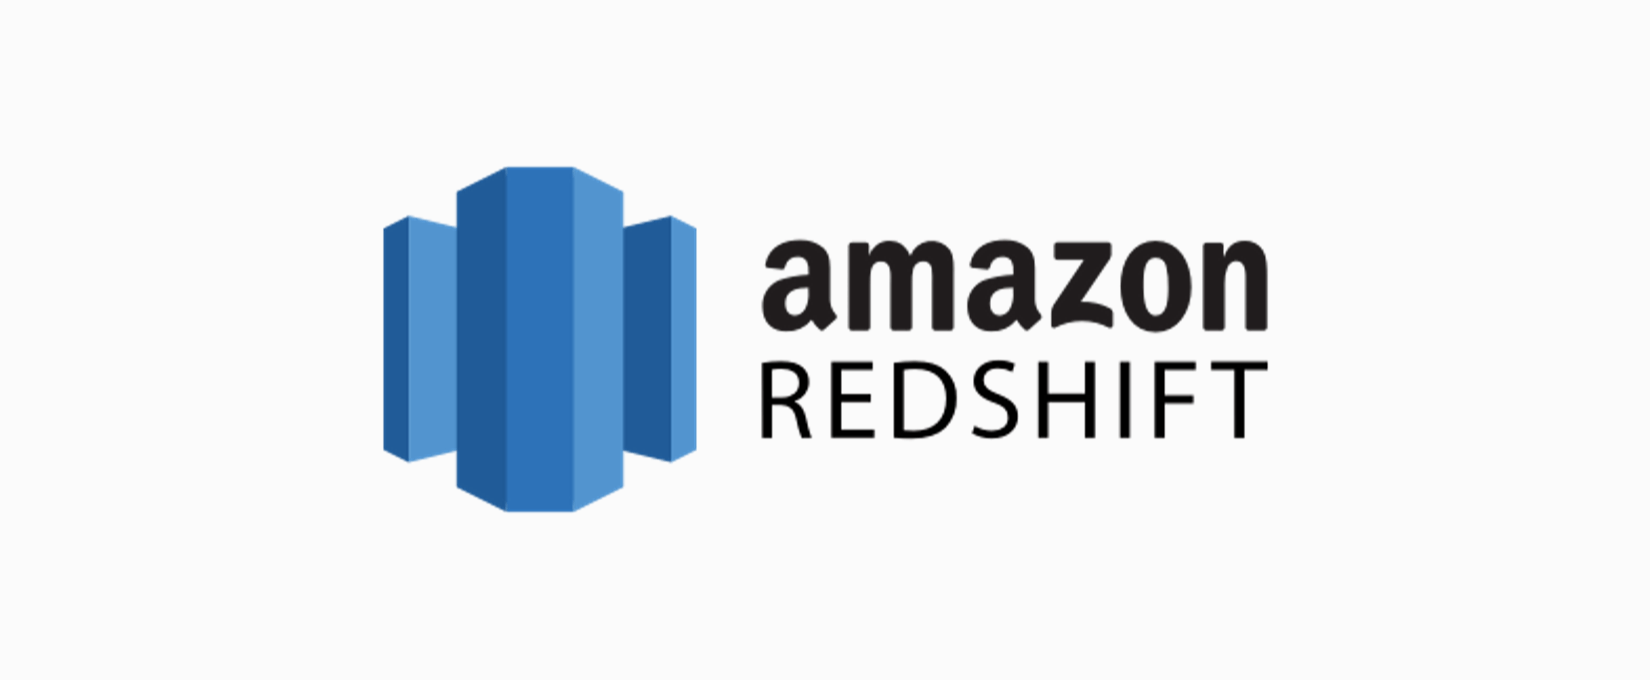 Amazon Redshift - 11 Key Points to Remember